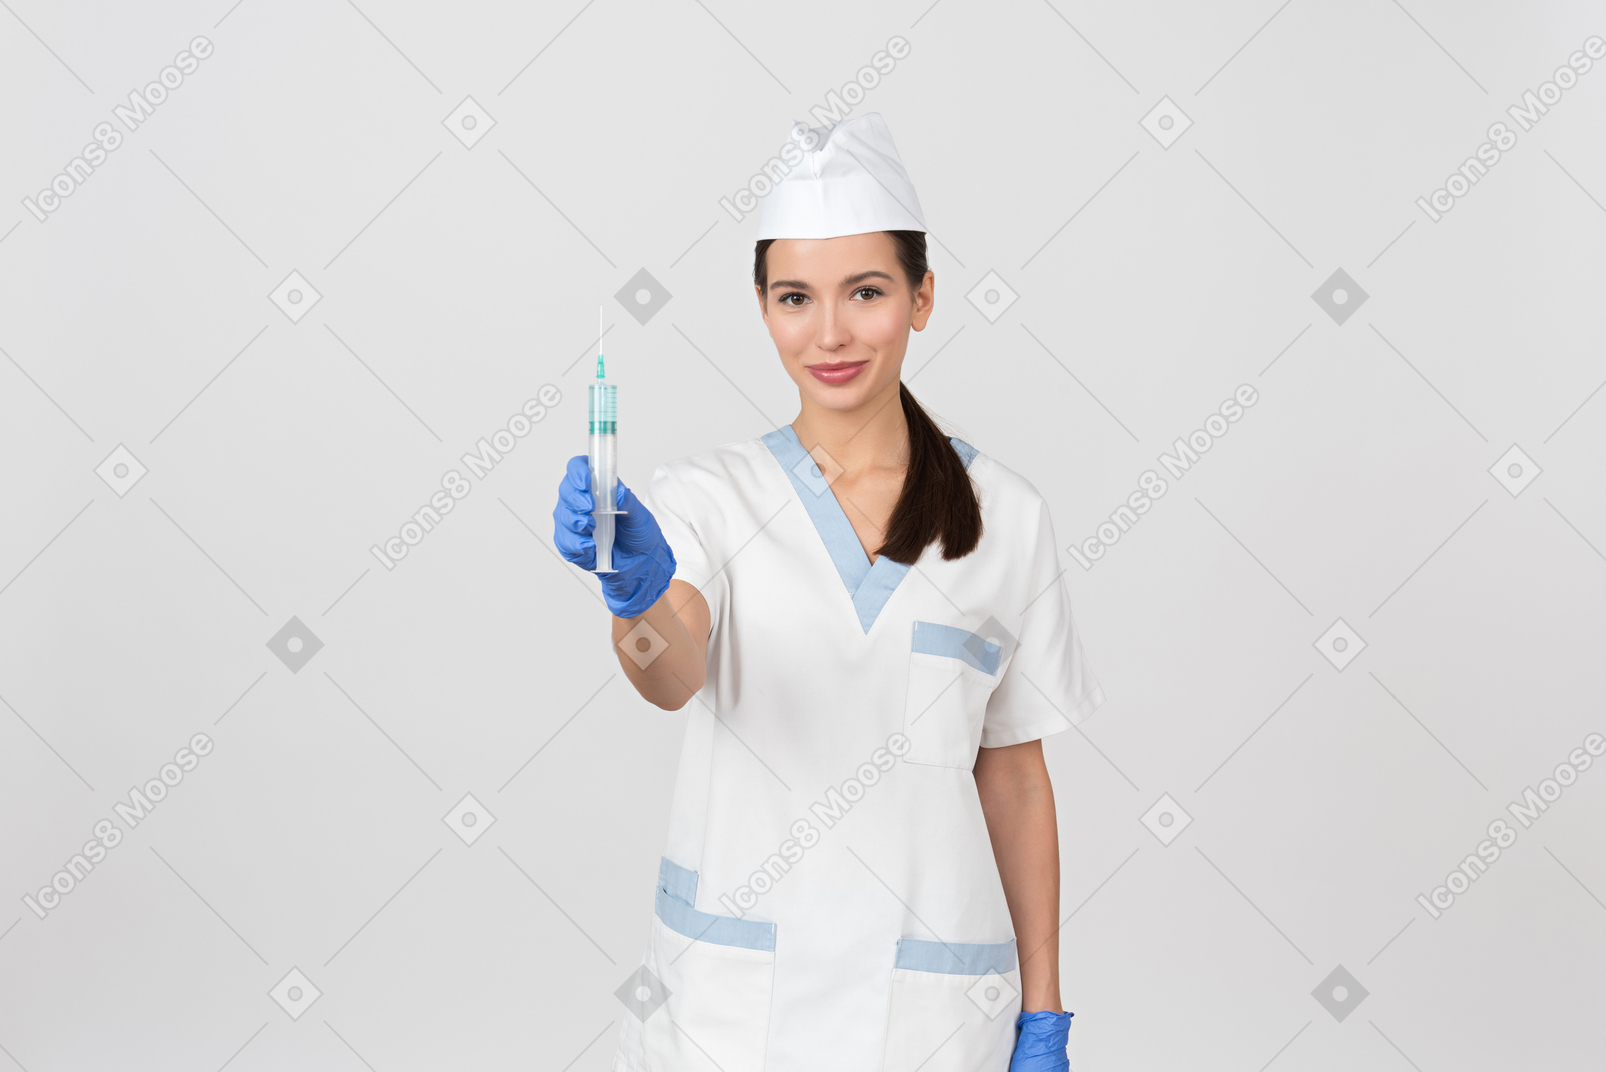 Attractive nurse demonstrating a disposable syringe